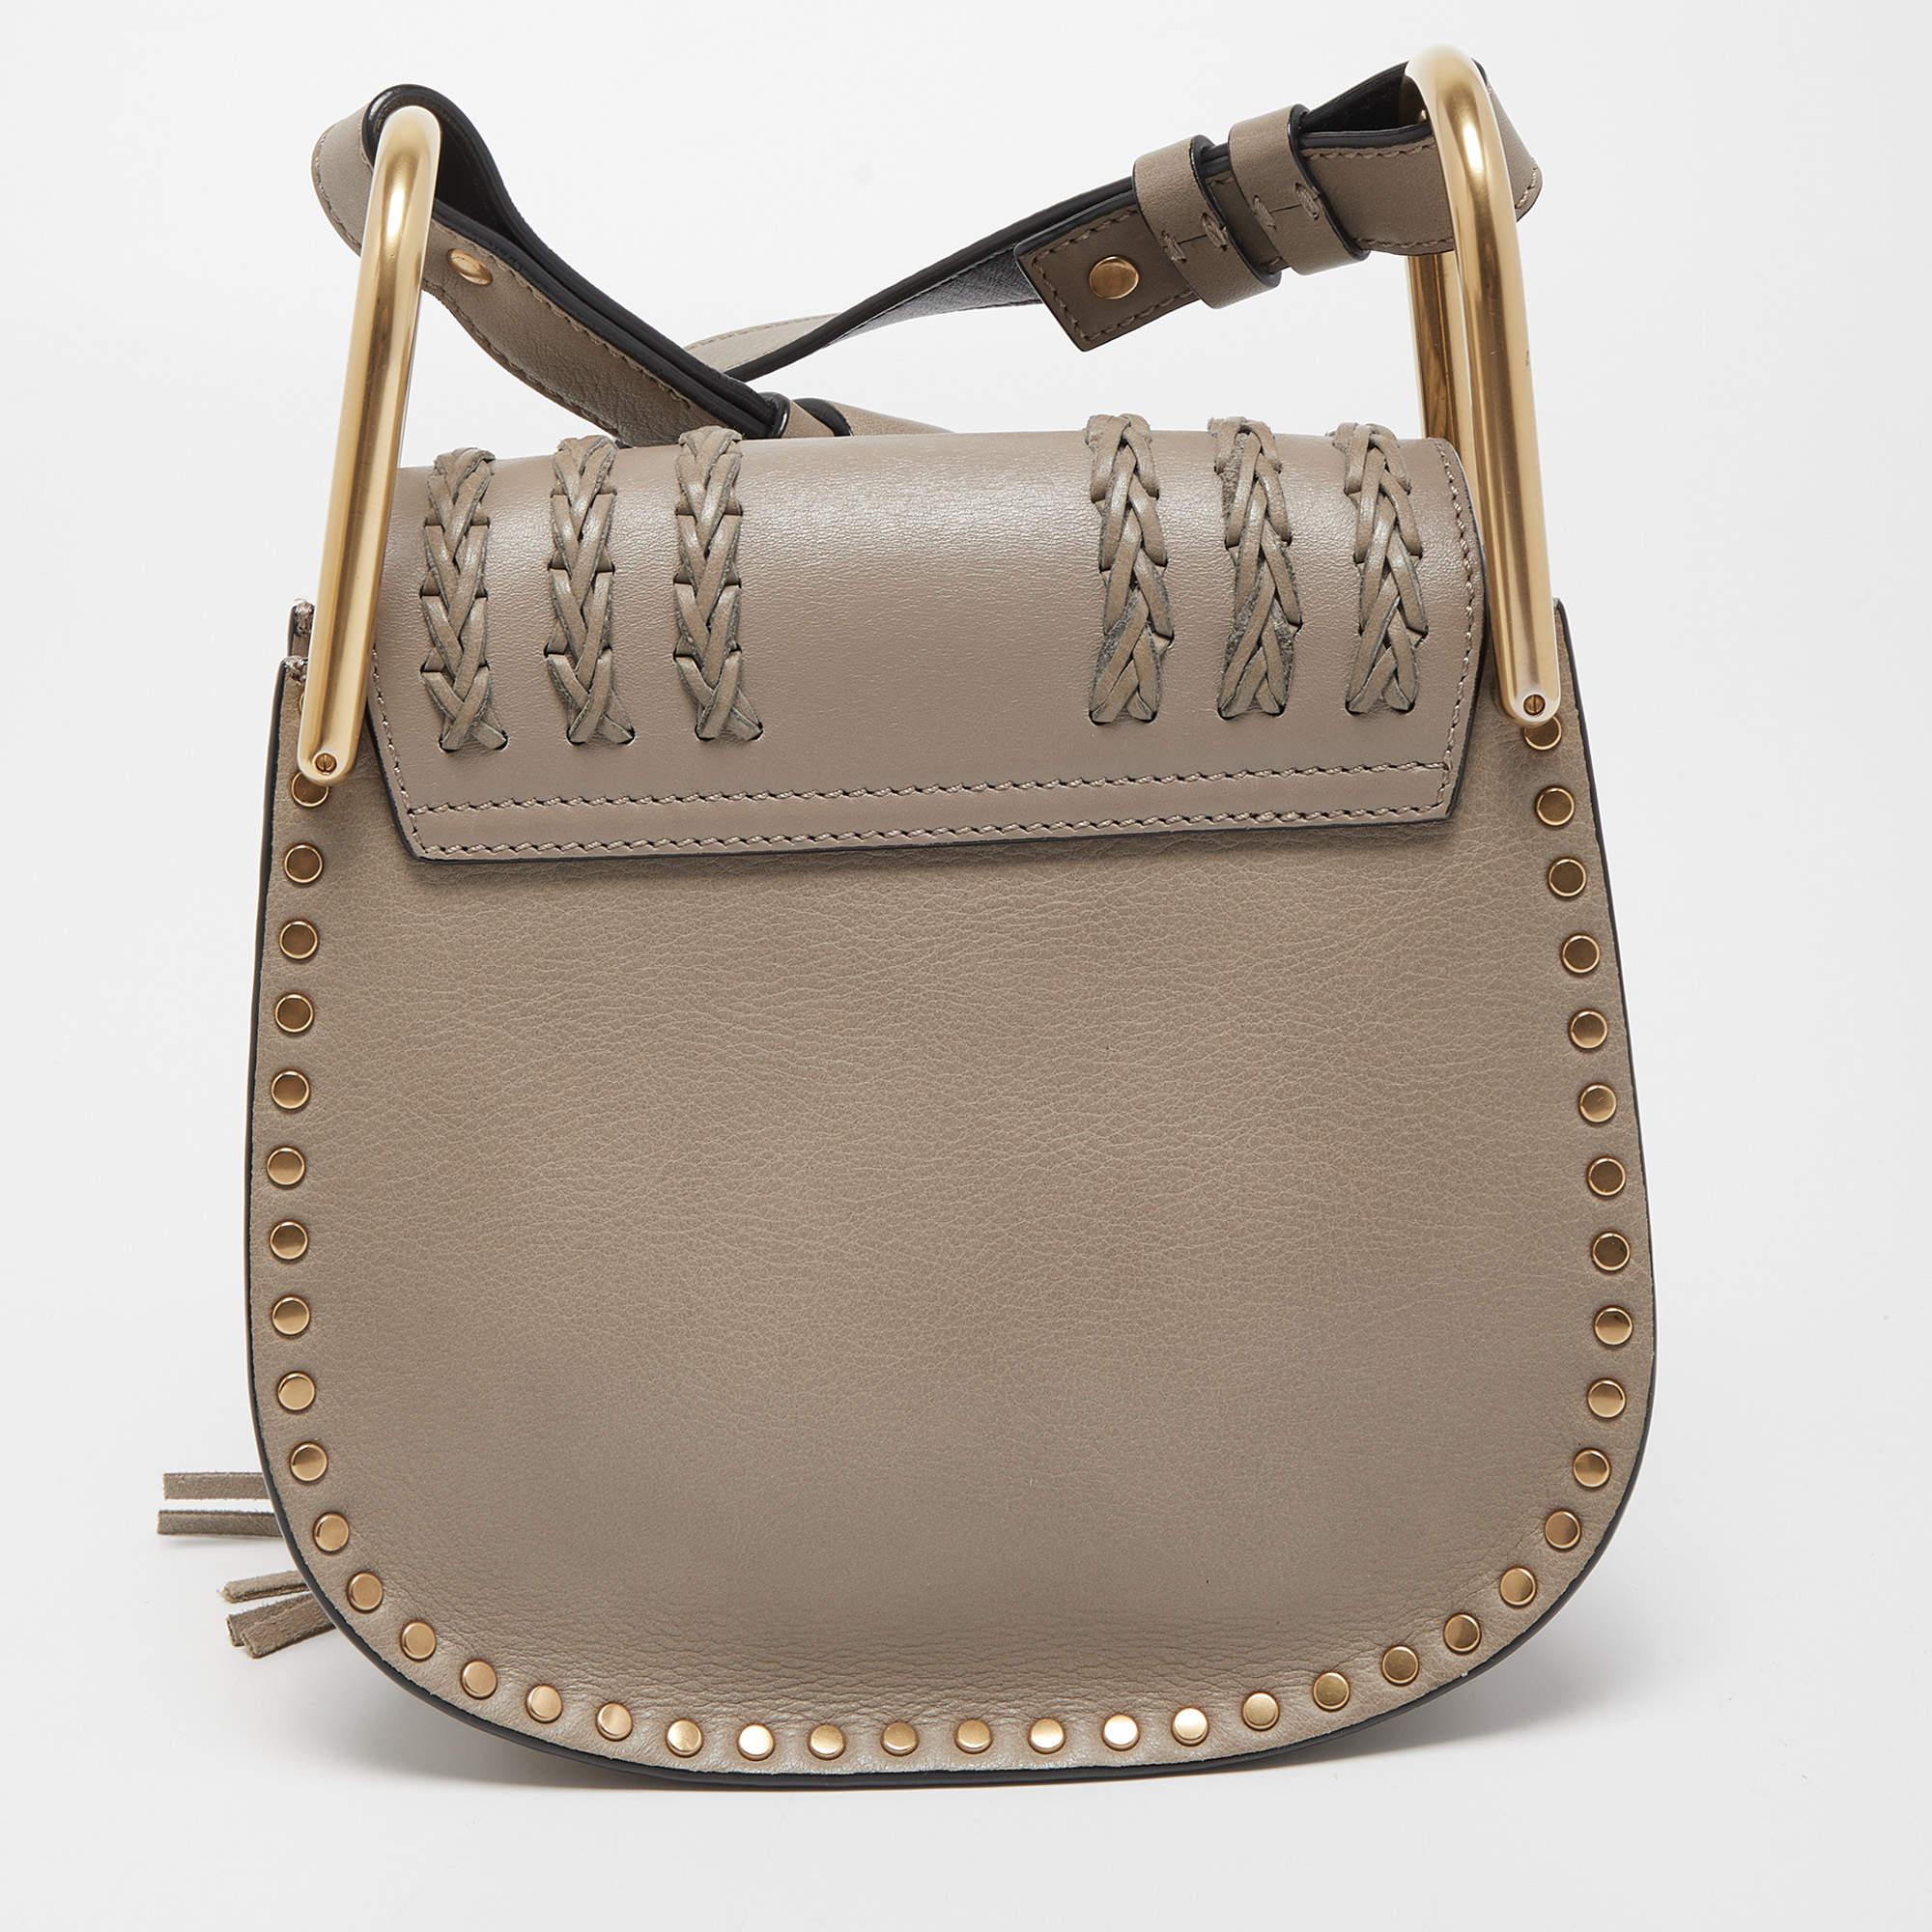 Trust this Chloe bag to be light, durable, and comfortable to carry. Crafted from leather, it comes in a dark beige hue. It features a suede interior, a long strap, and weave details.

